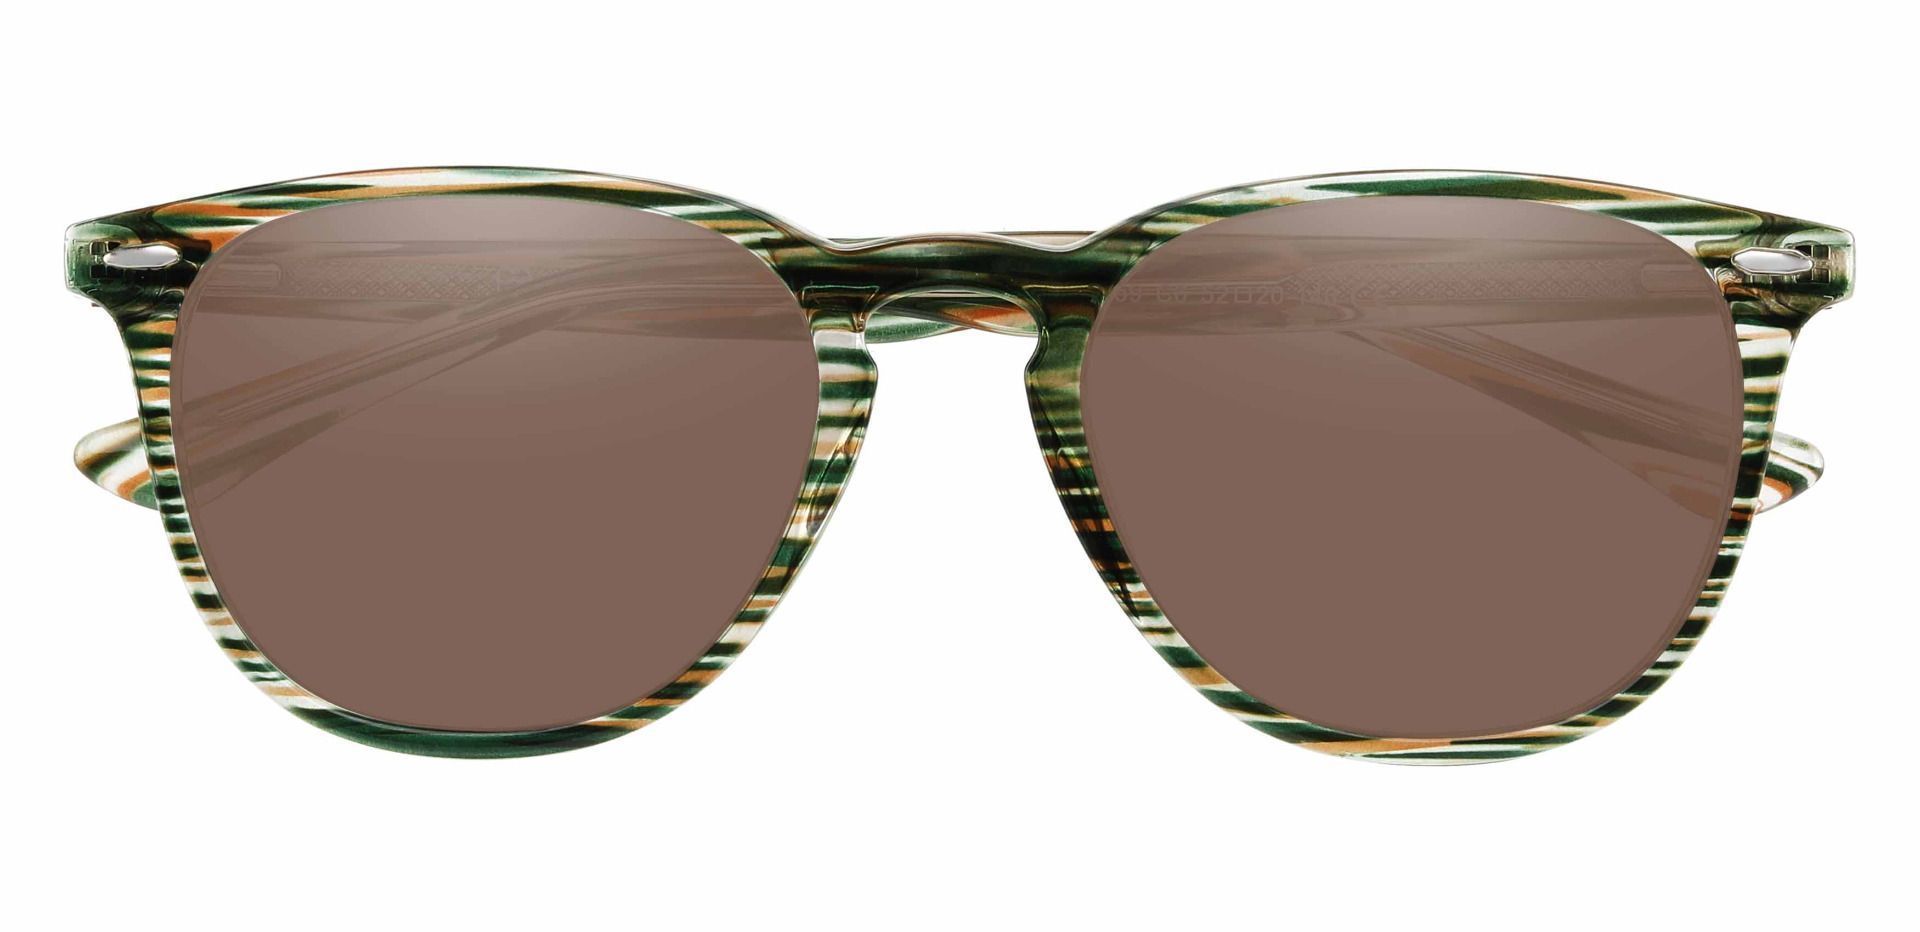 Sycamore Oval Progressive Sunglasses - Green Frame With Brown Lenses